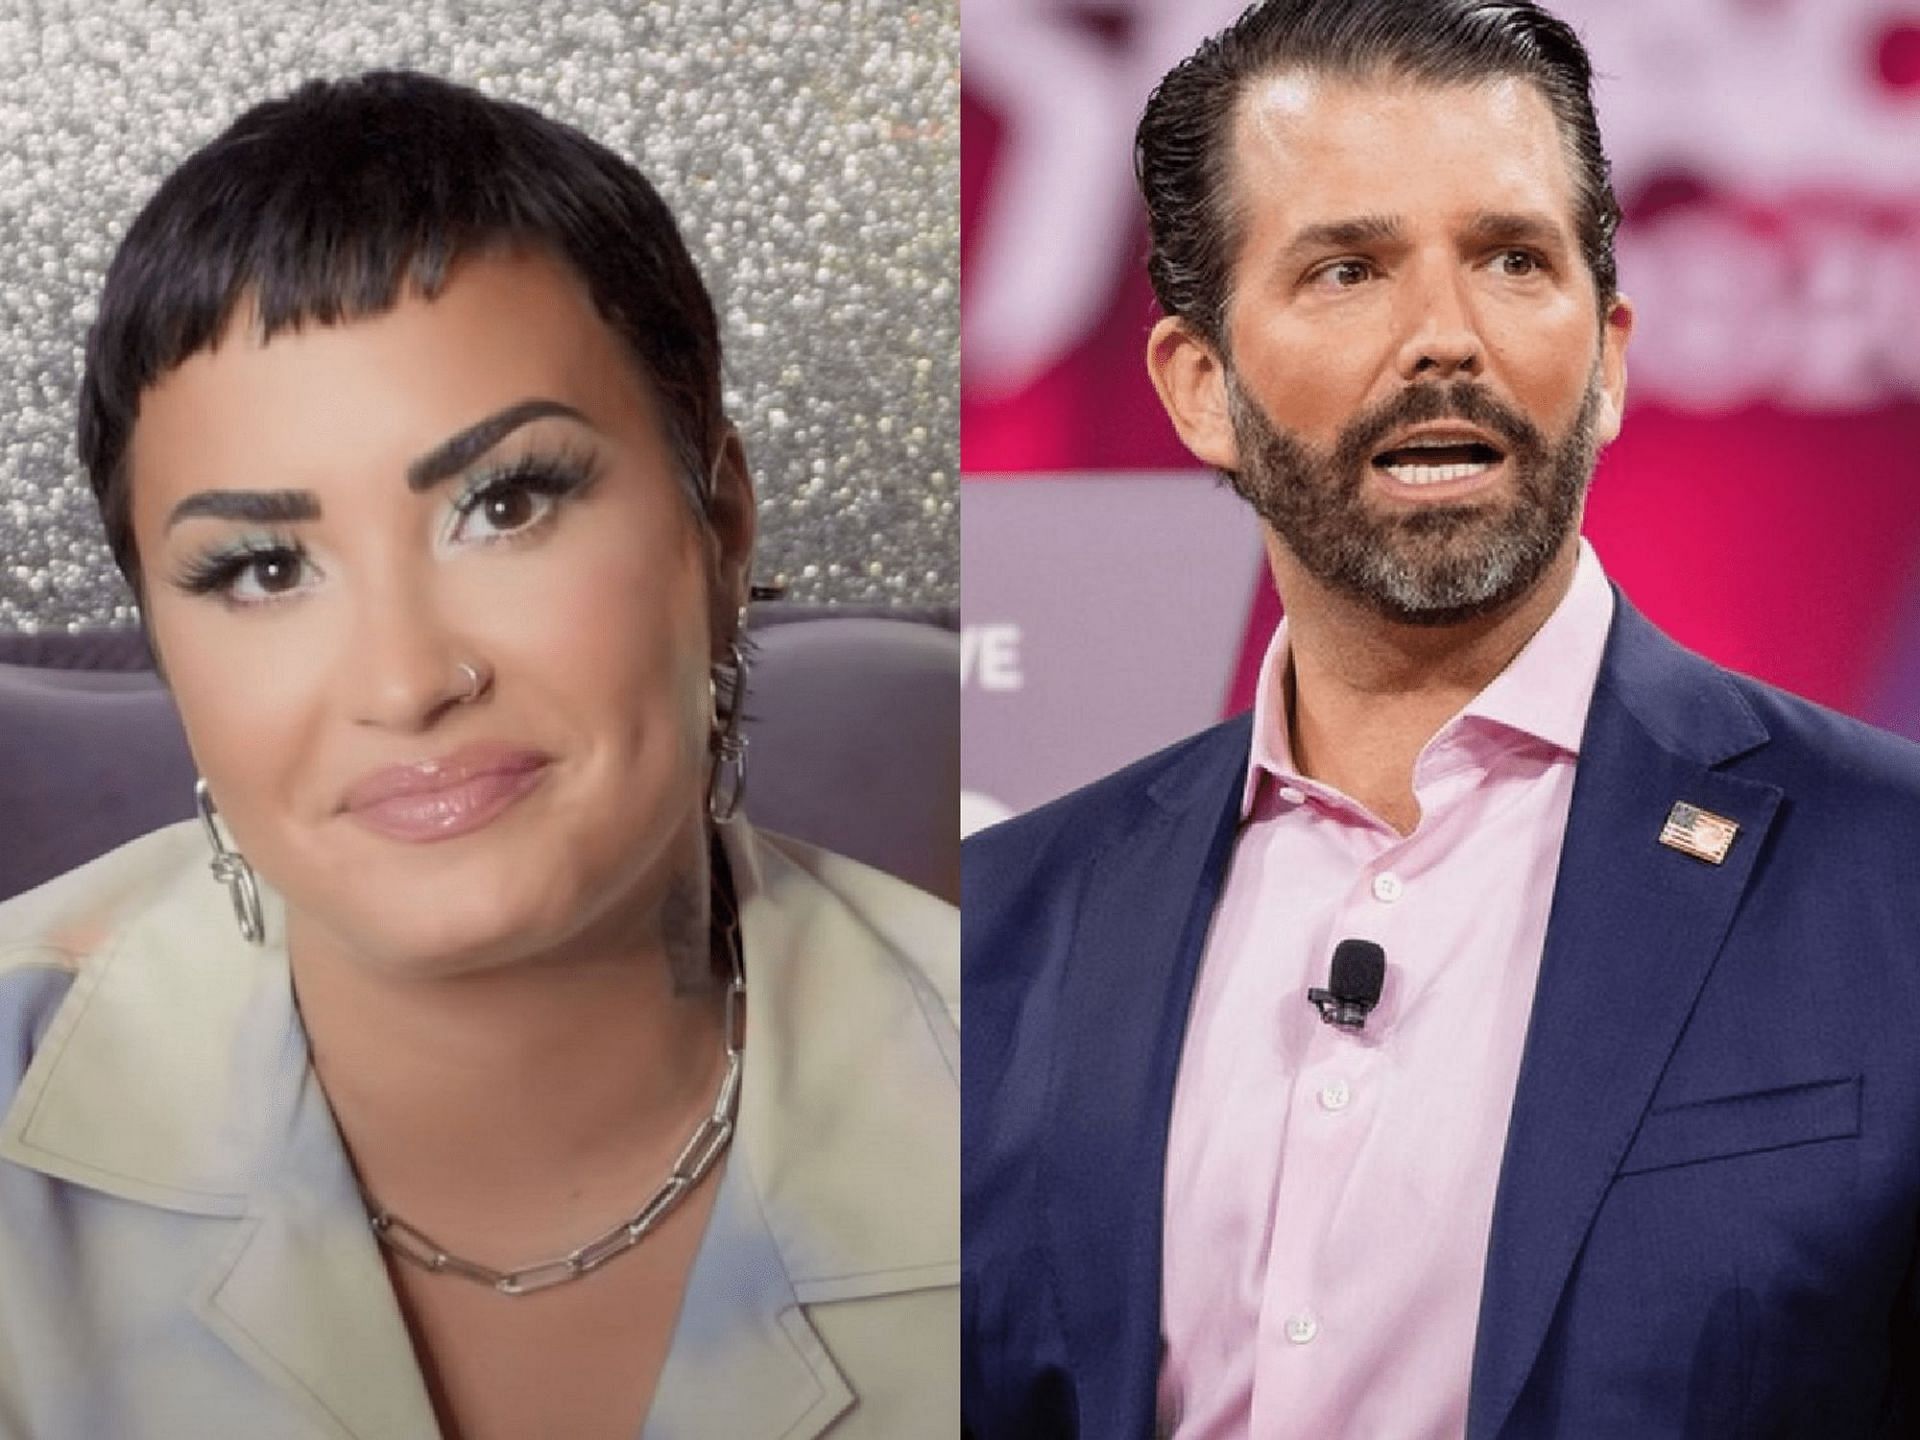 Donald Trump Jr. comments on Demi Lovato&#039;s appearance (Image via YouTube/Demi Lovato and Getty Images) 